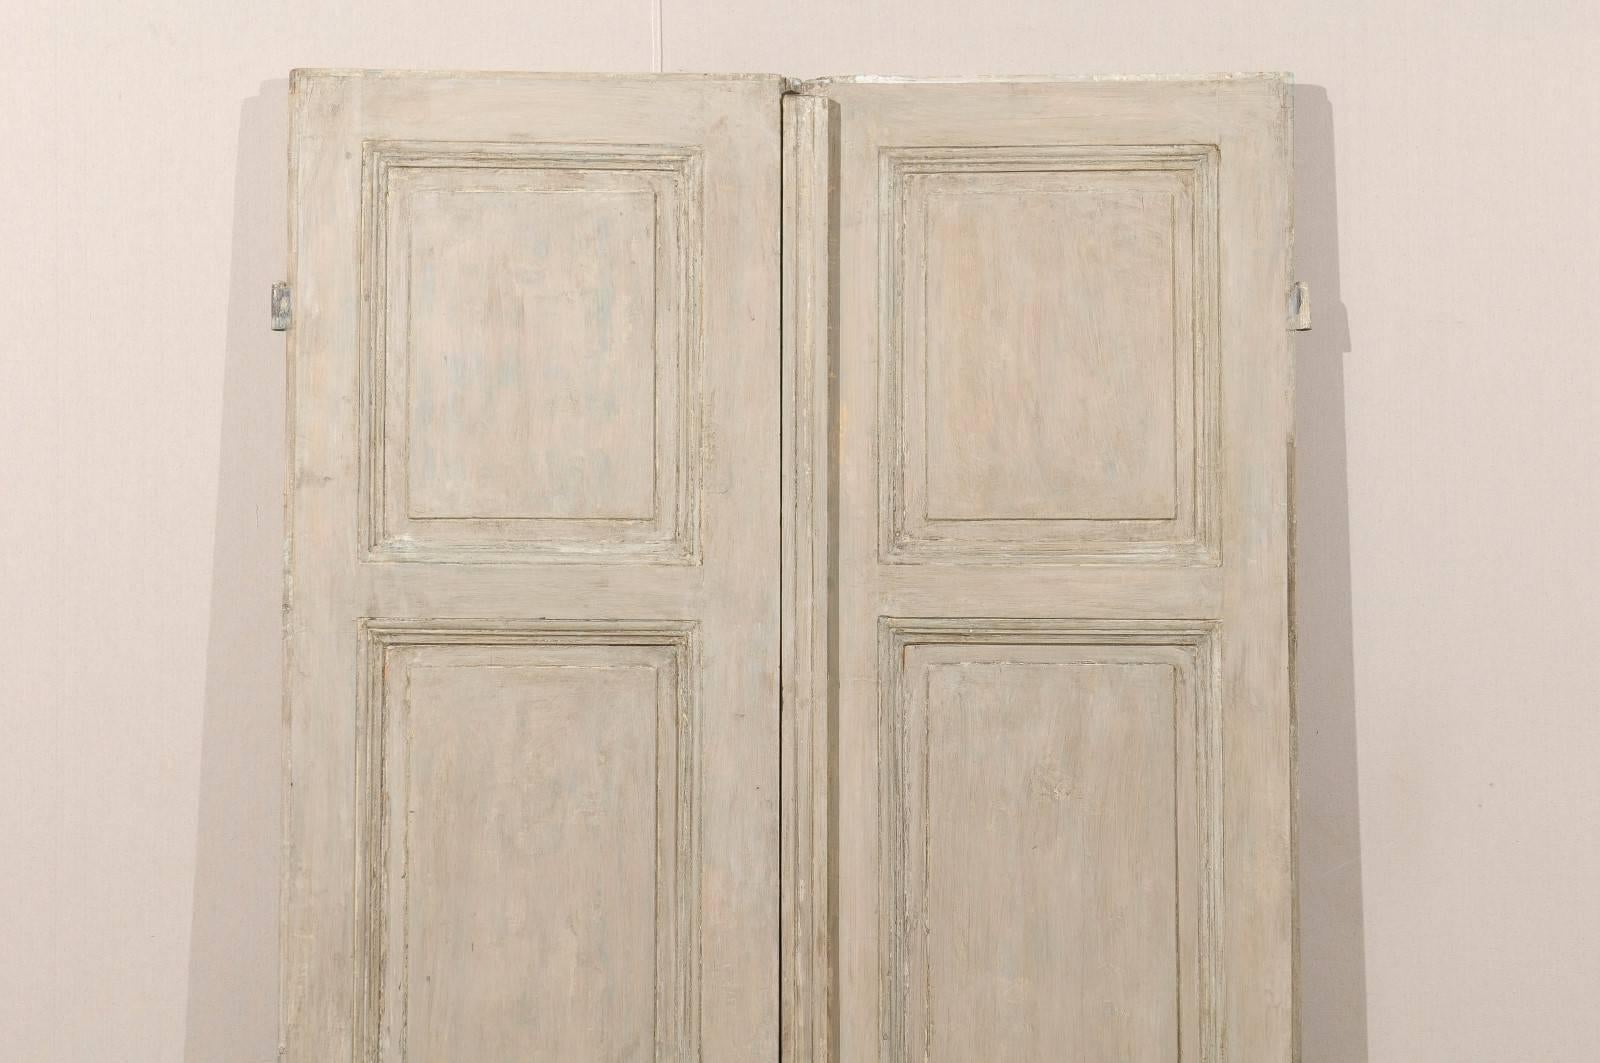 19th Century Pair of French Grey Painted Doors, Grey Color with Some Taupe Colored Accents